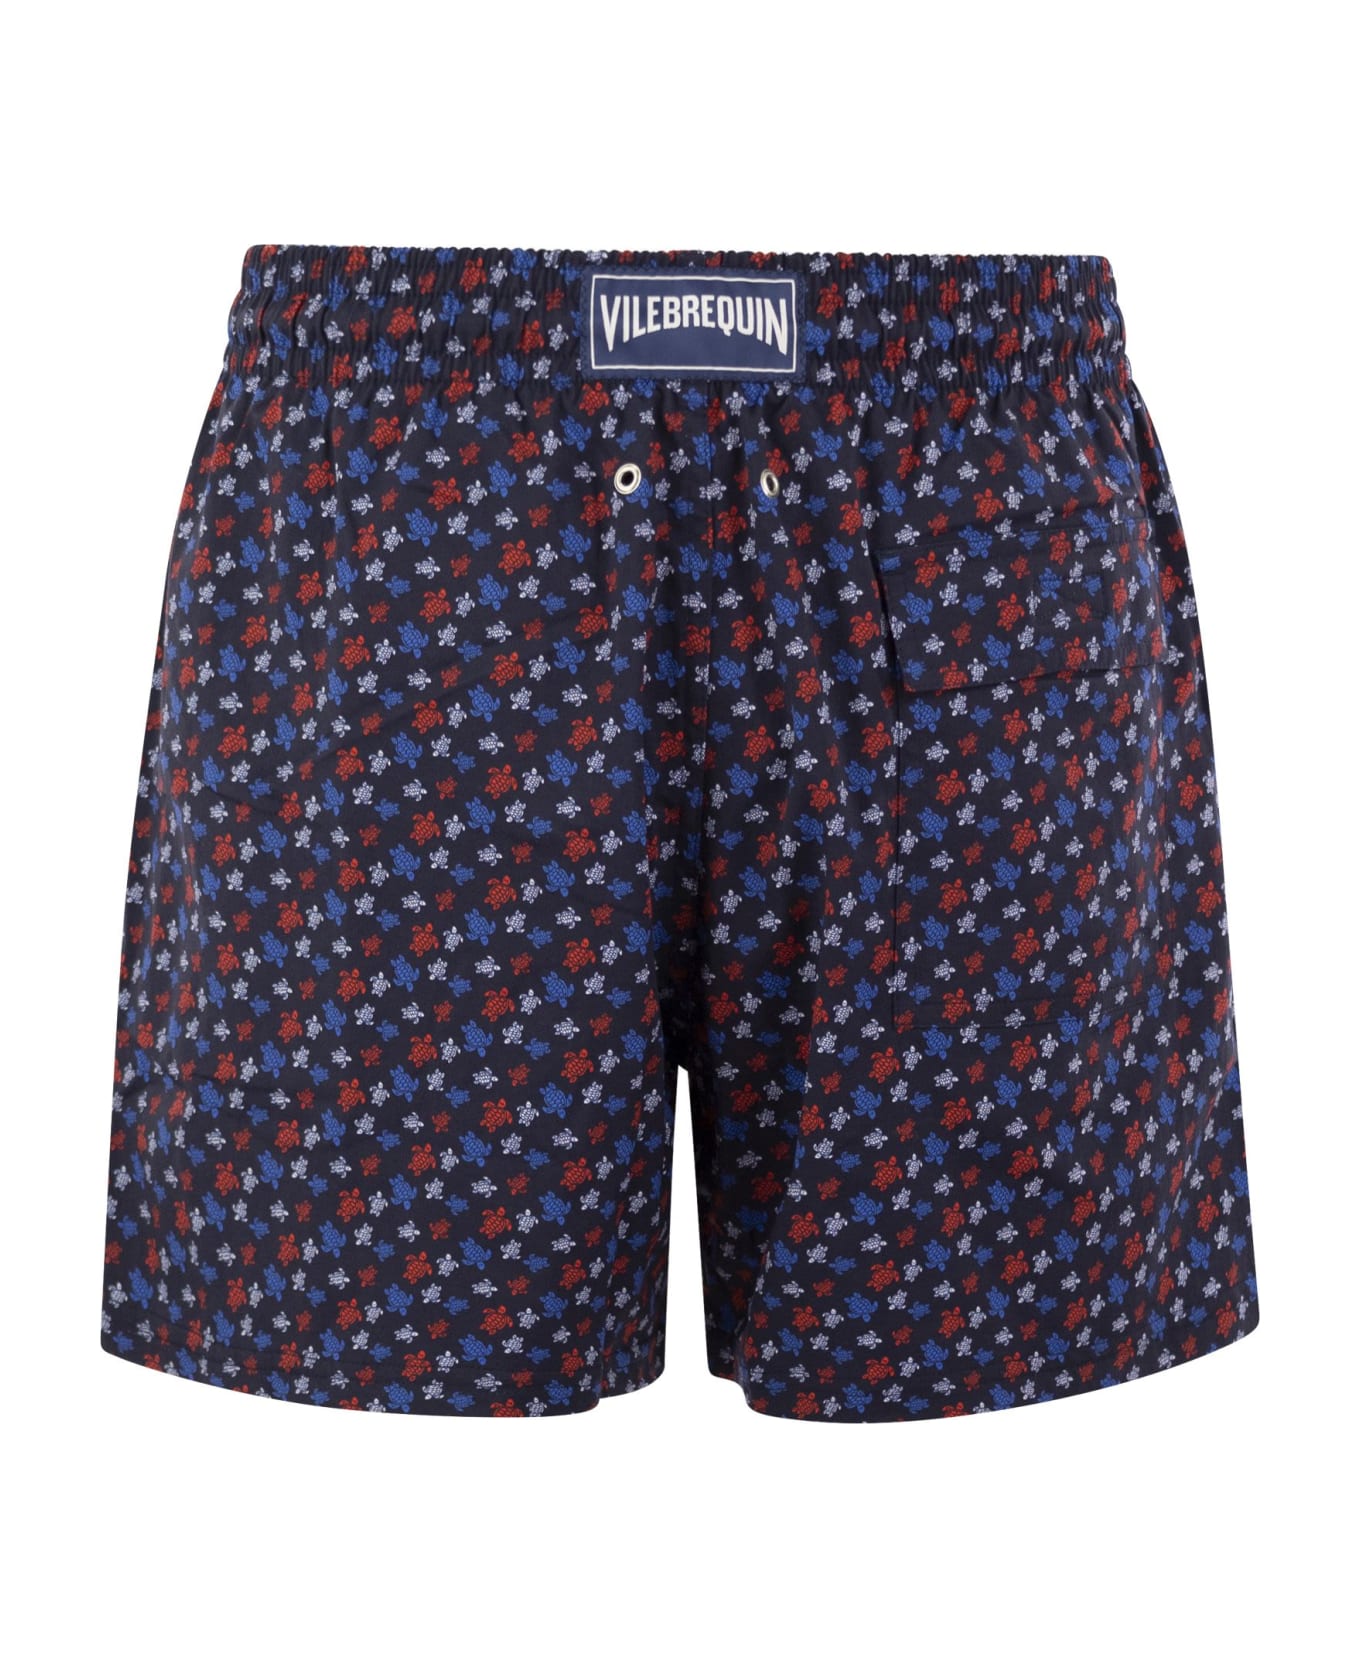 Vilebrequin Stretch Beach Shorts With Patterned Print - Night Blue 水着